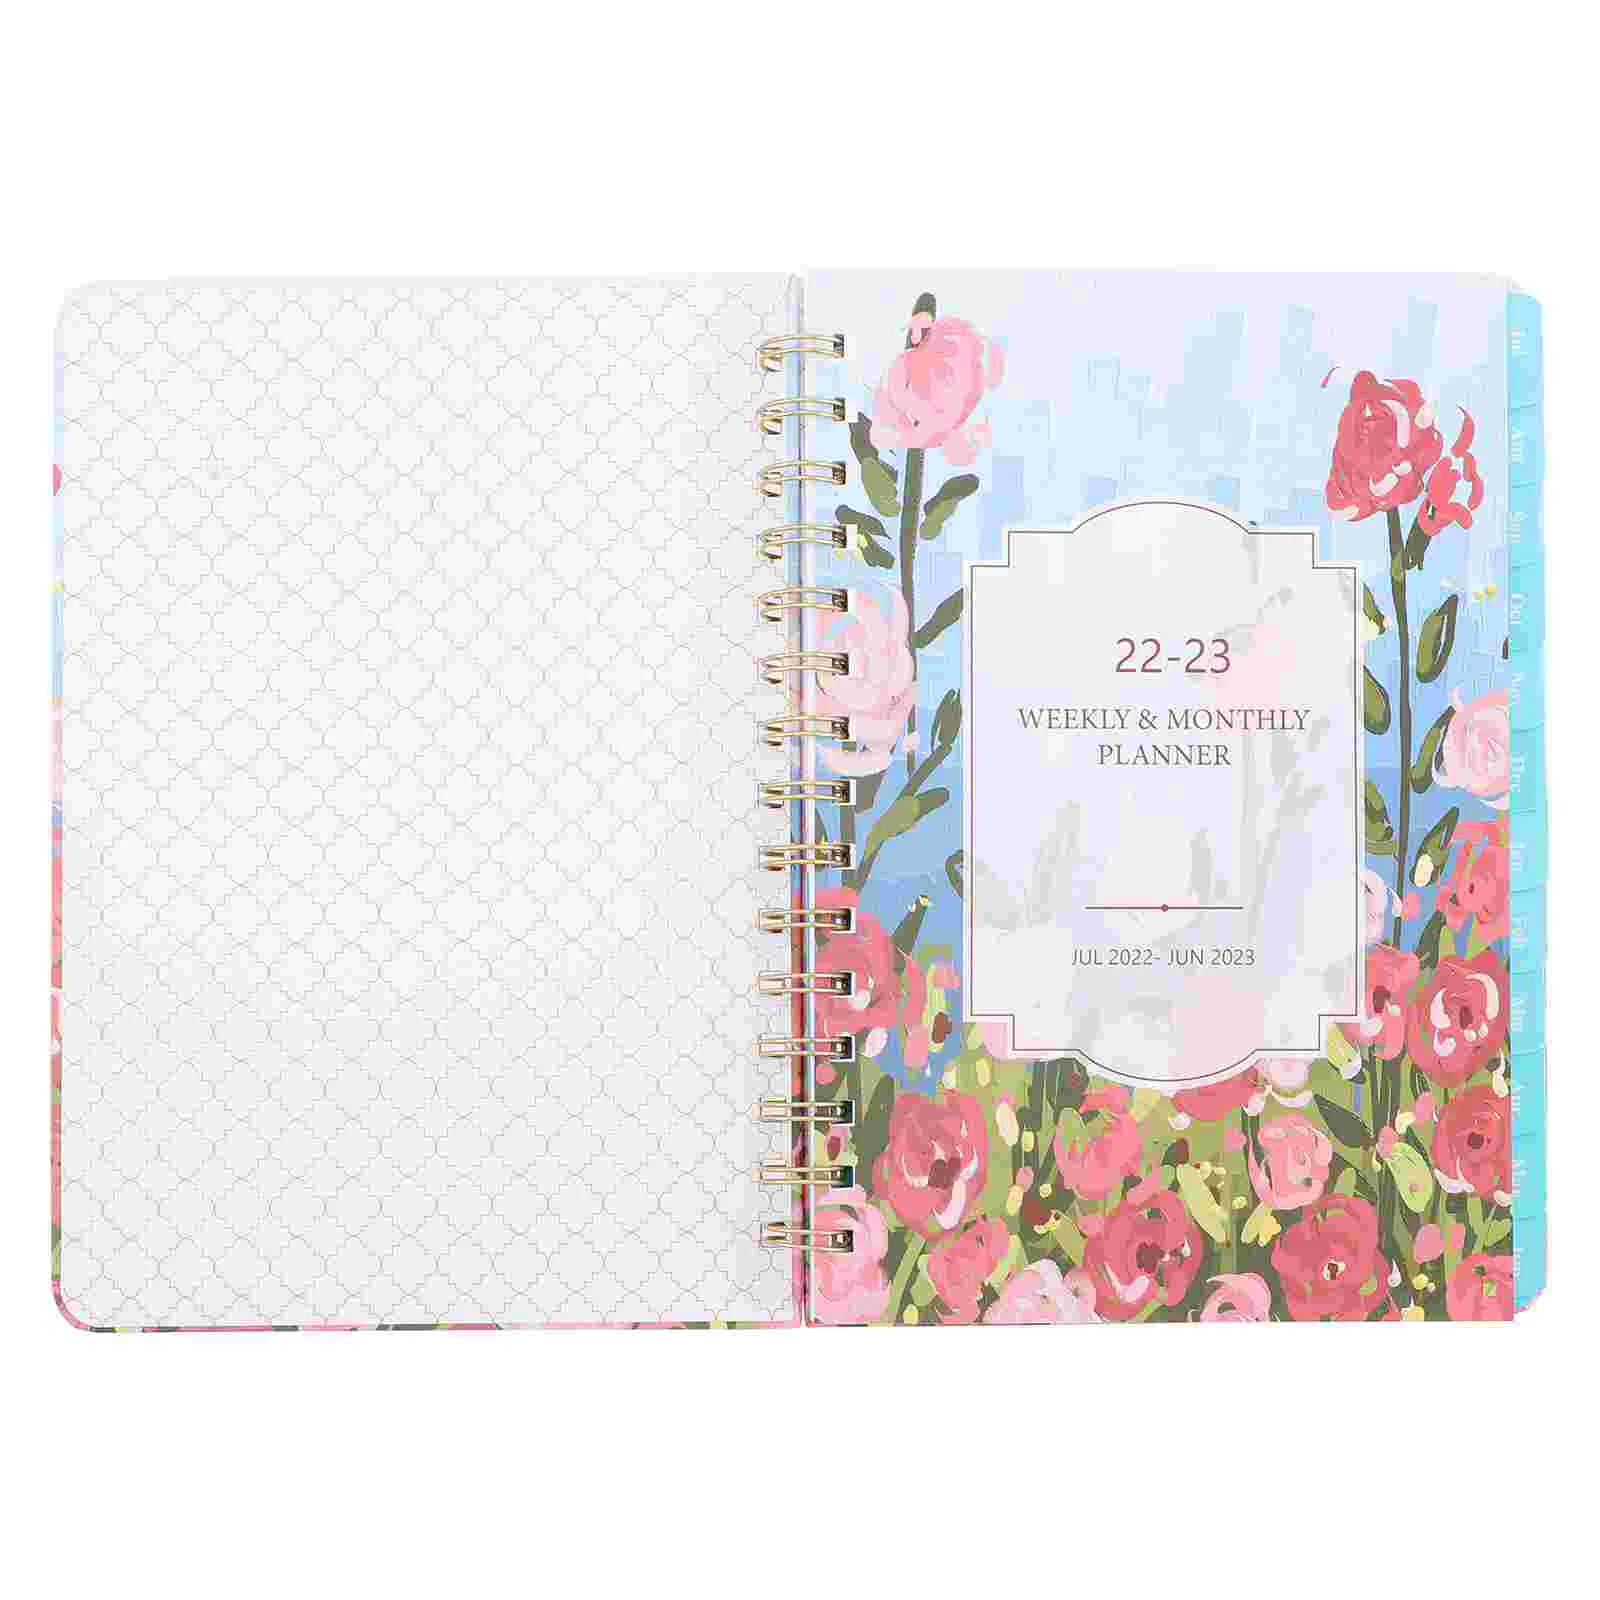 

Planner 2023 Notepad Notebook Monthly Weekly Daily Book Journal Academic Coil List Doand Spiral Schedule Planning Calendar